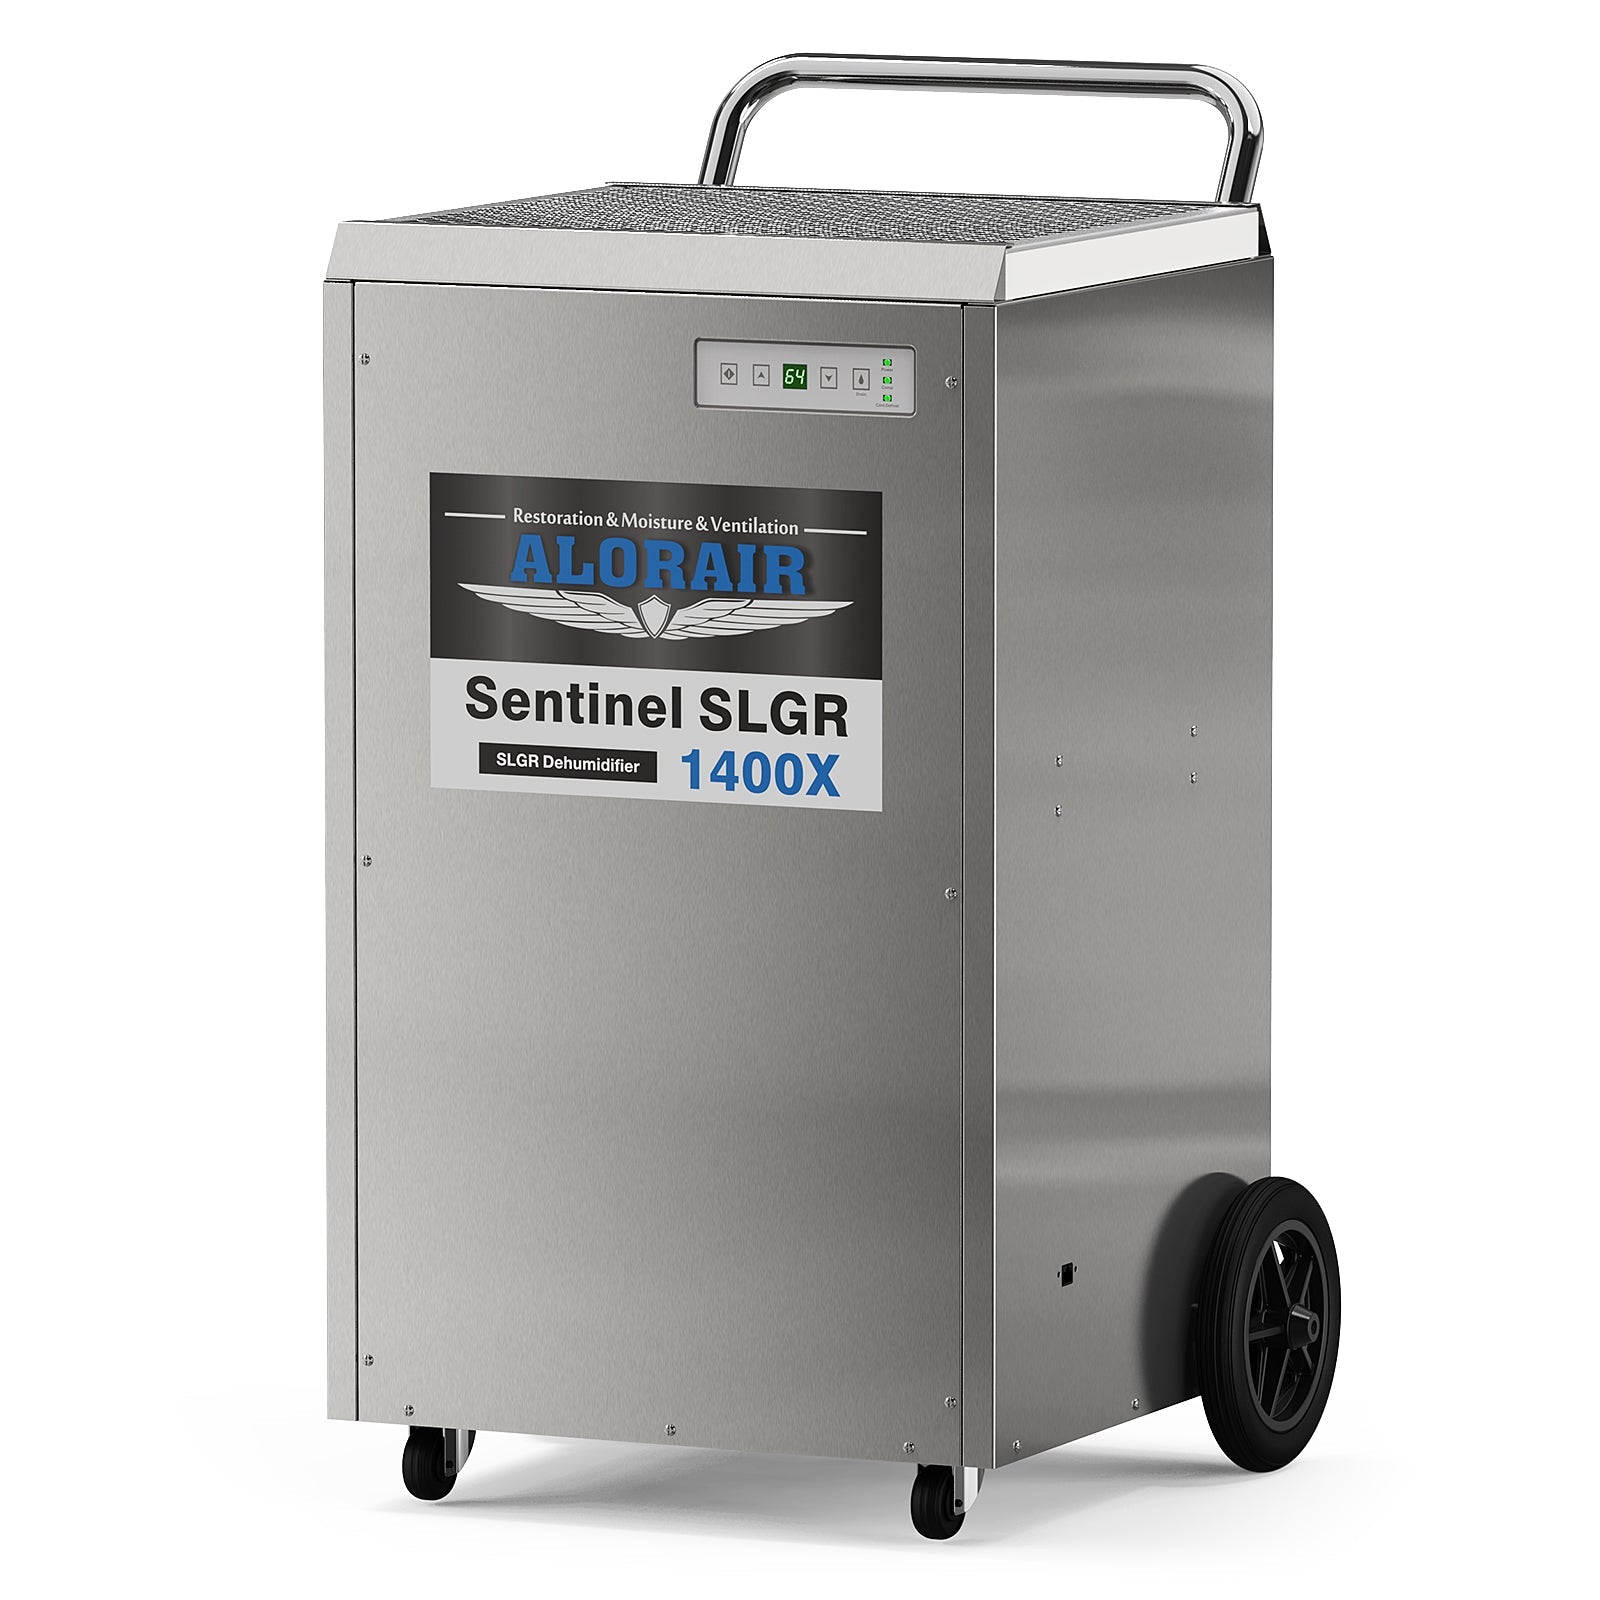 ALORAIR® Sentinel SLGR 1400X Commercial Dehumidifier, 140 PPD with Pump, Stainless Steel Body